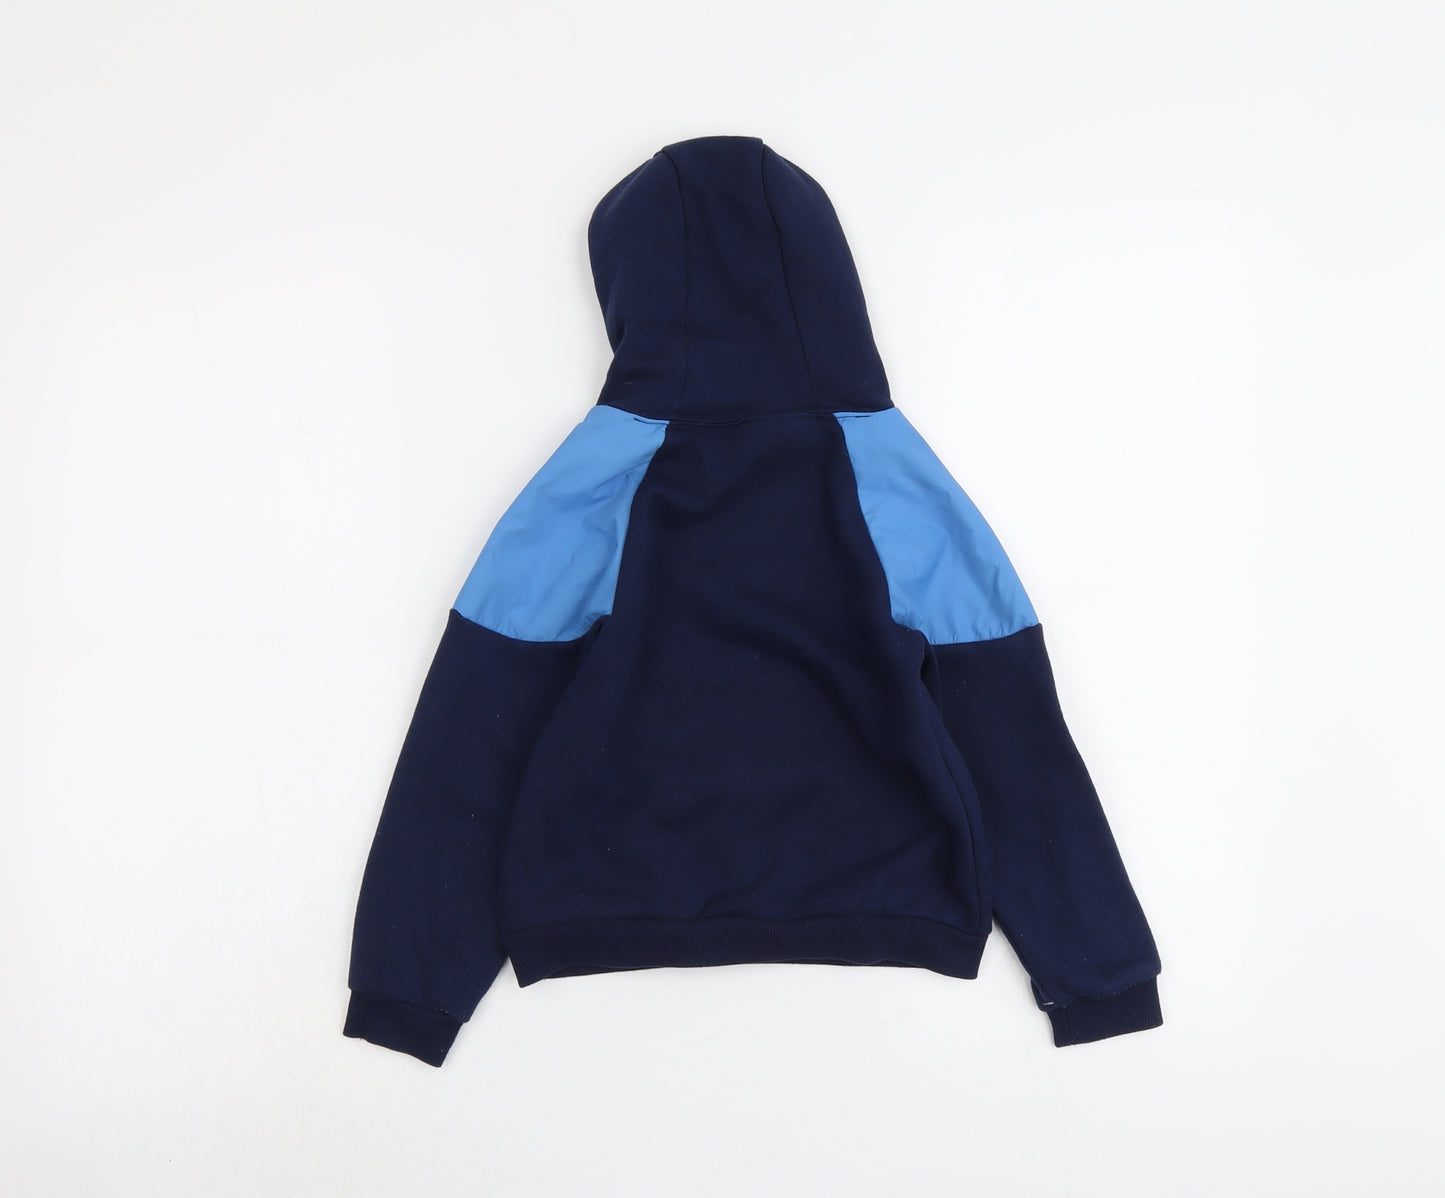 McKenzie Boys Blue Polyester Pullover Hoodie Size 7-8 Years Pullover